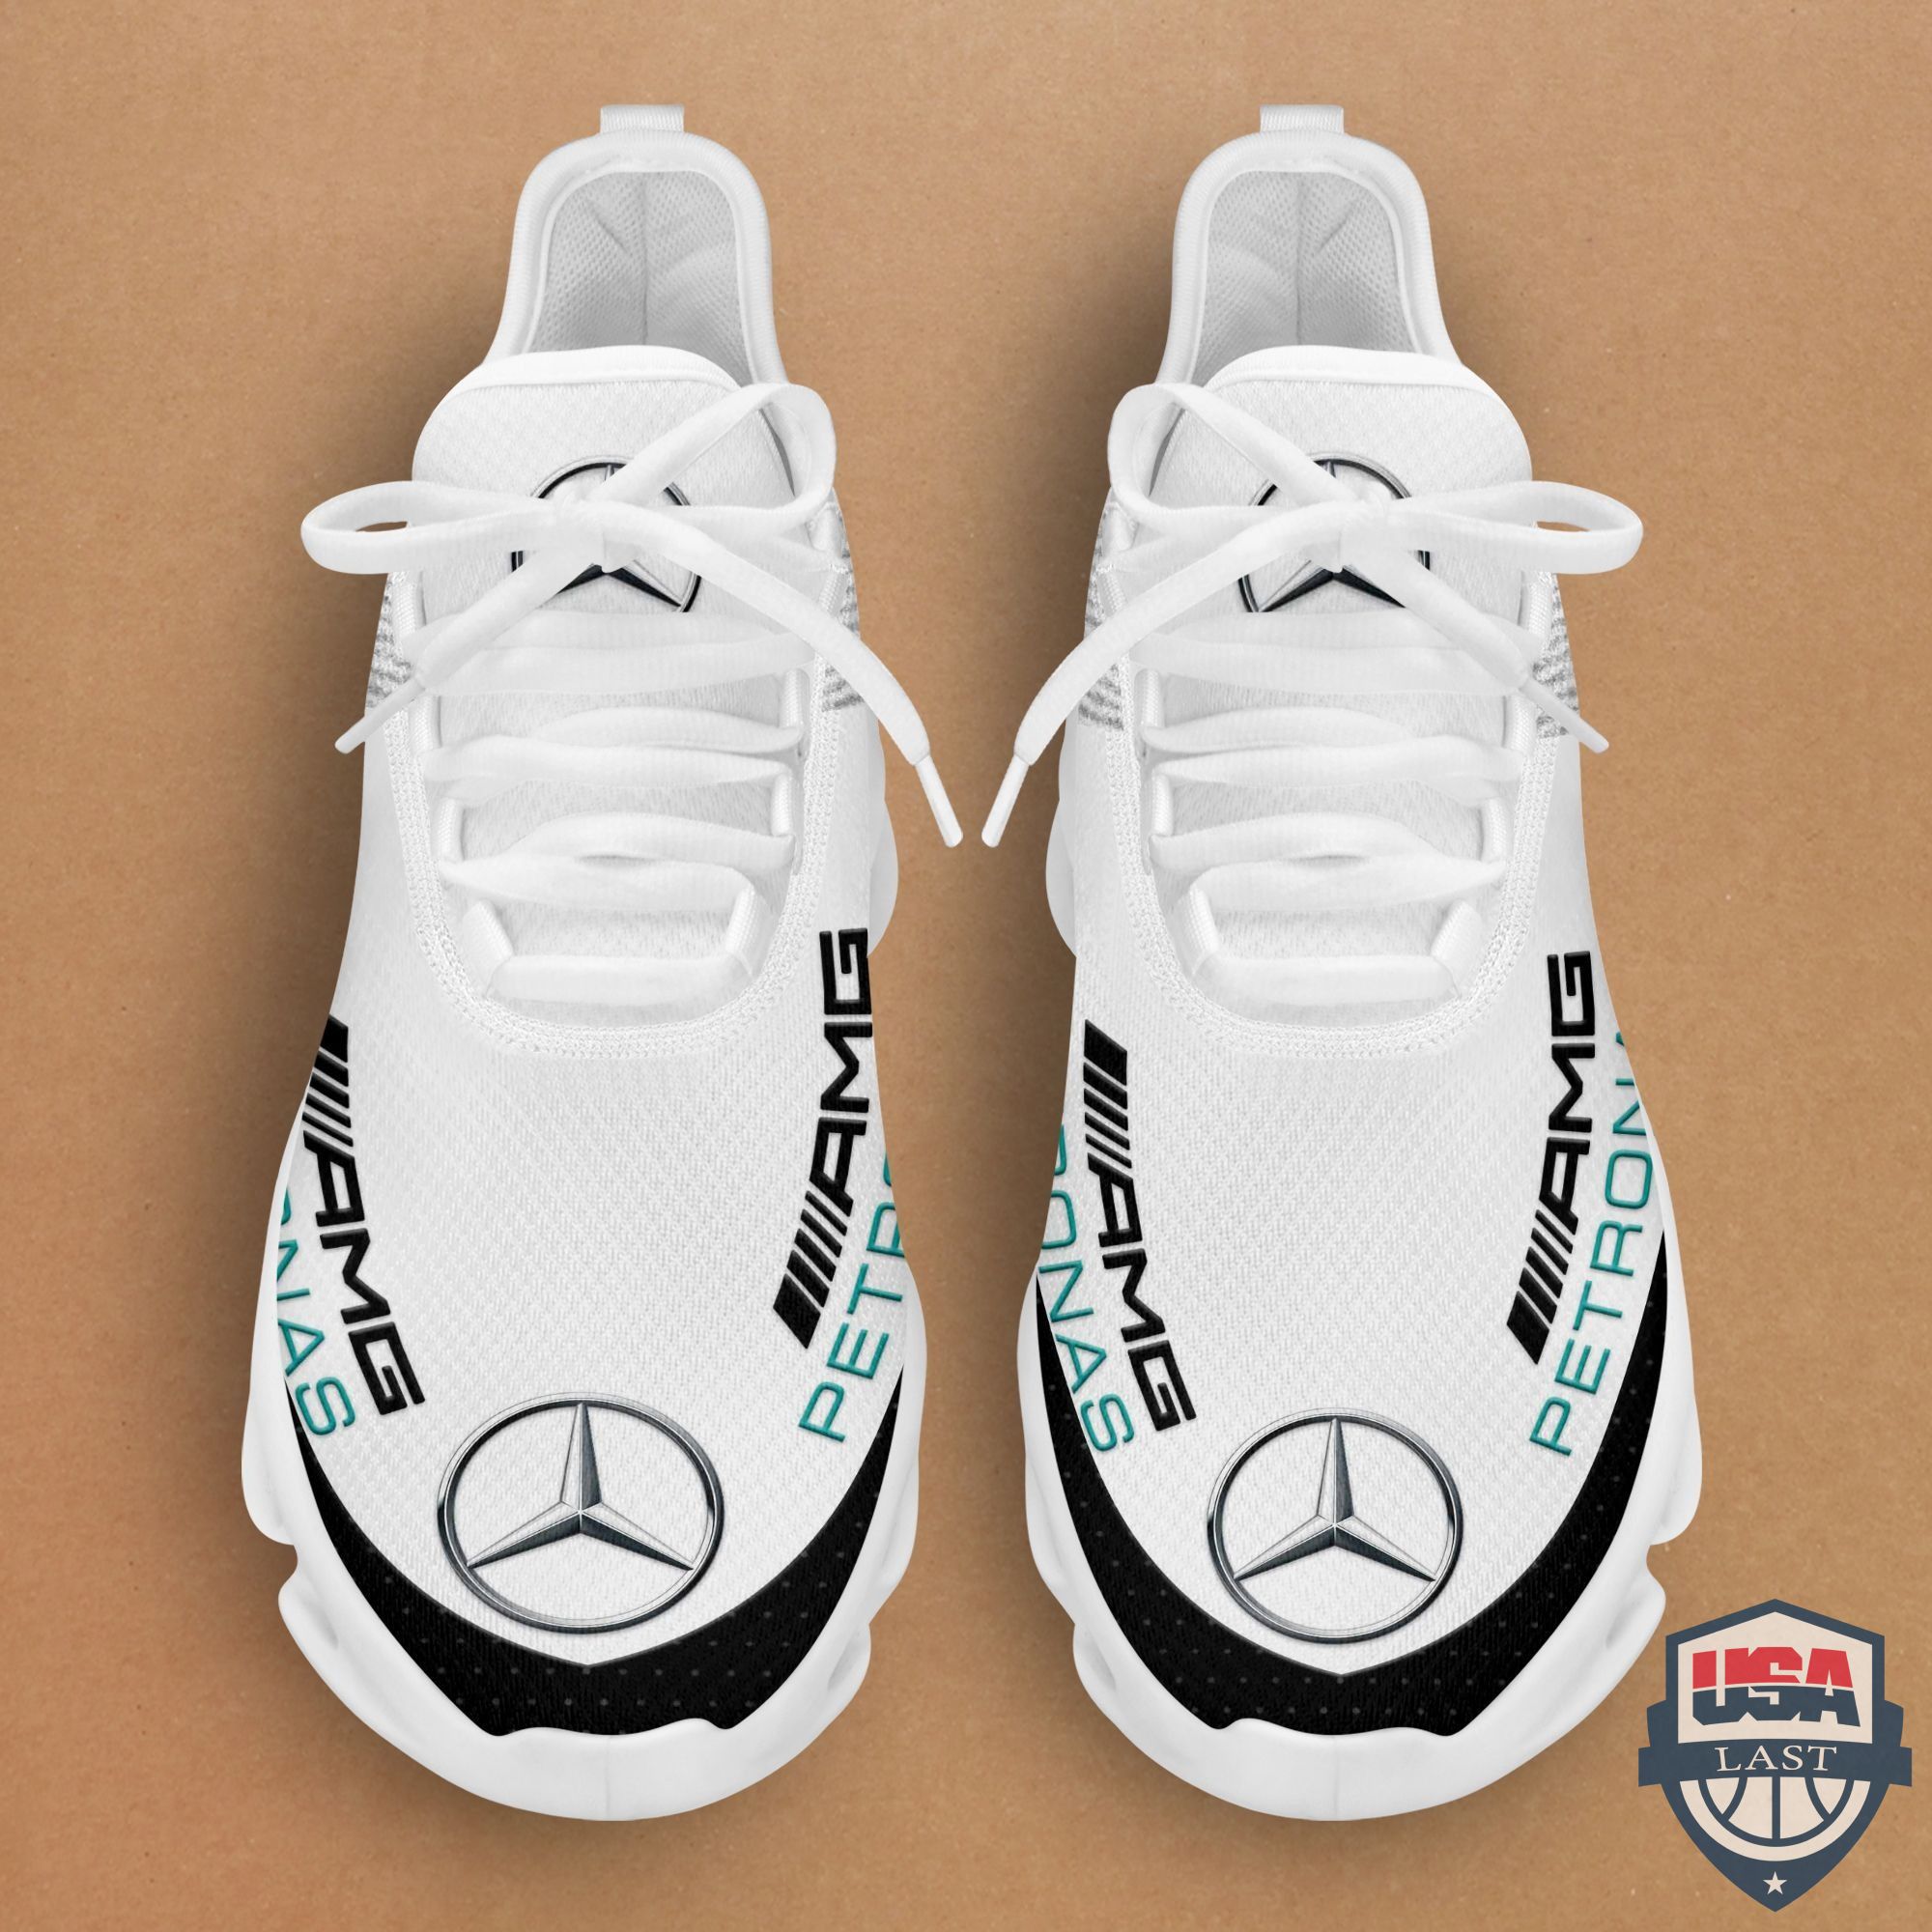 Top Trending – Mercedes AMG Petronas F1 Max Soul Shoes White Version